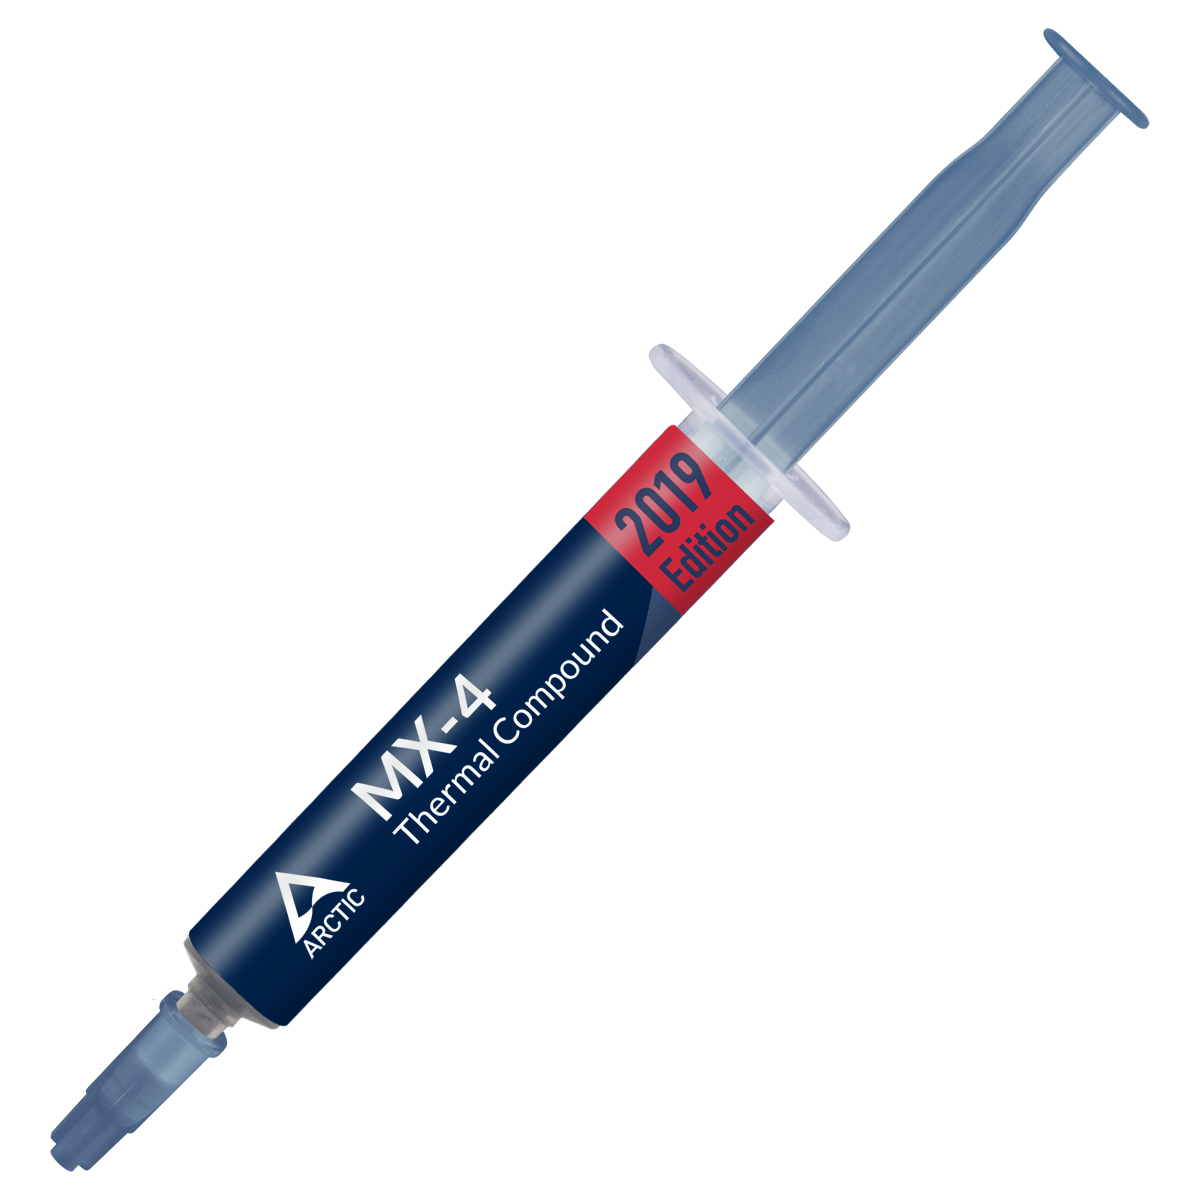 ARCTIC MX-4 4g - High Performance Thermal Compound0 